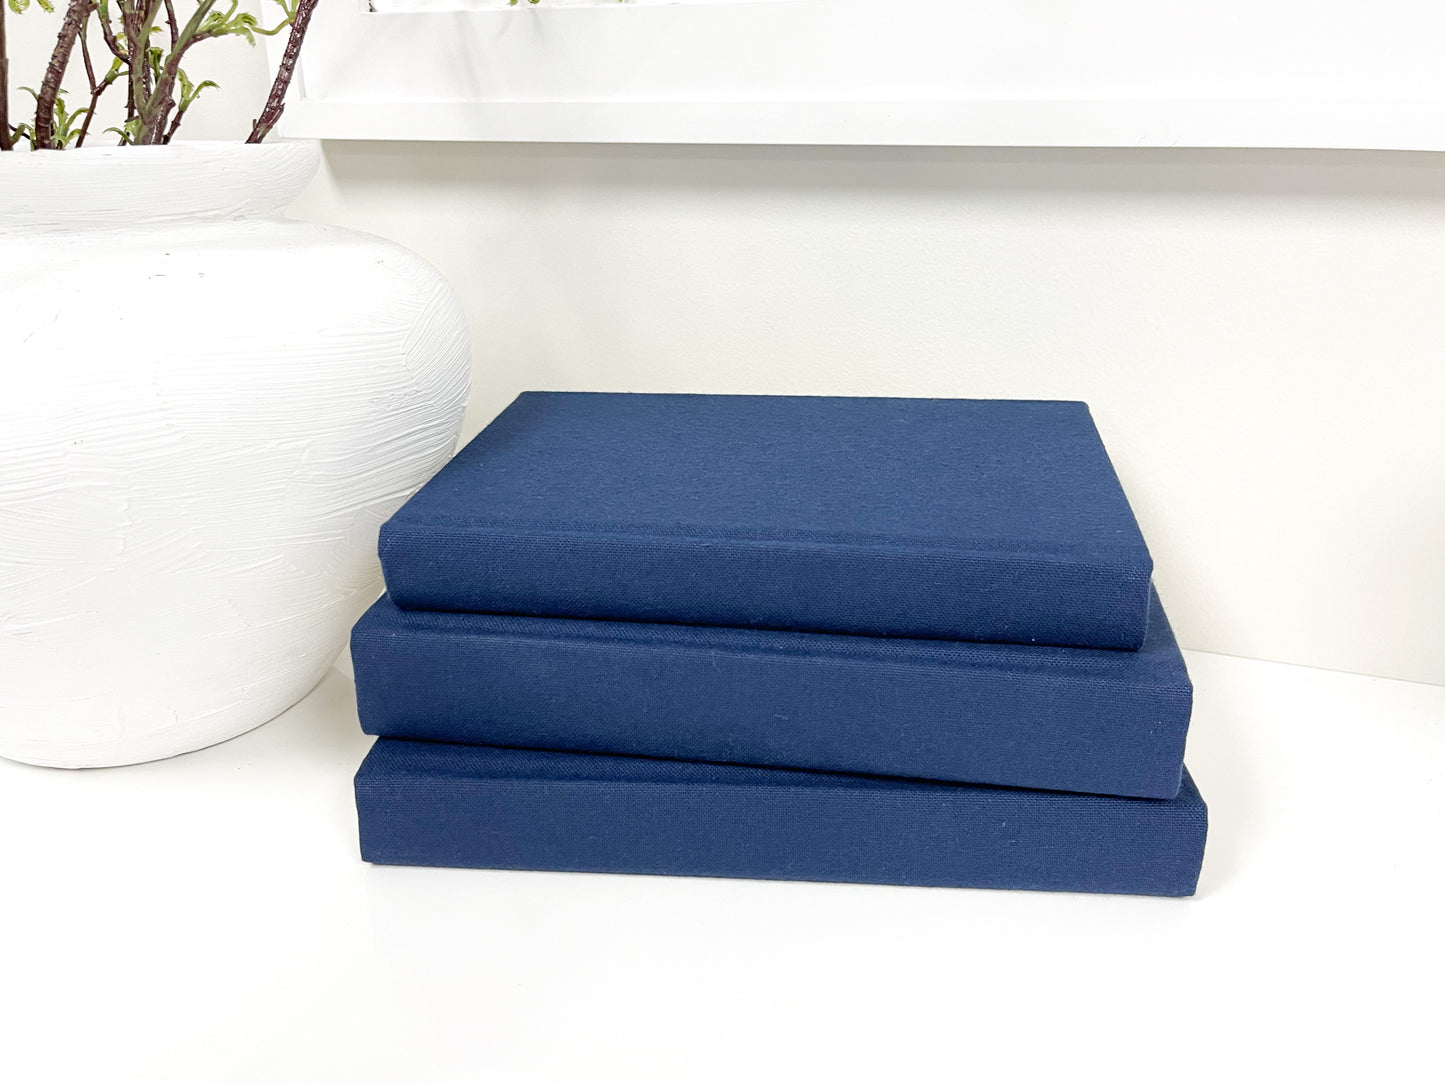 Solid Navy Blue Fabric Covered Book